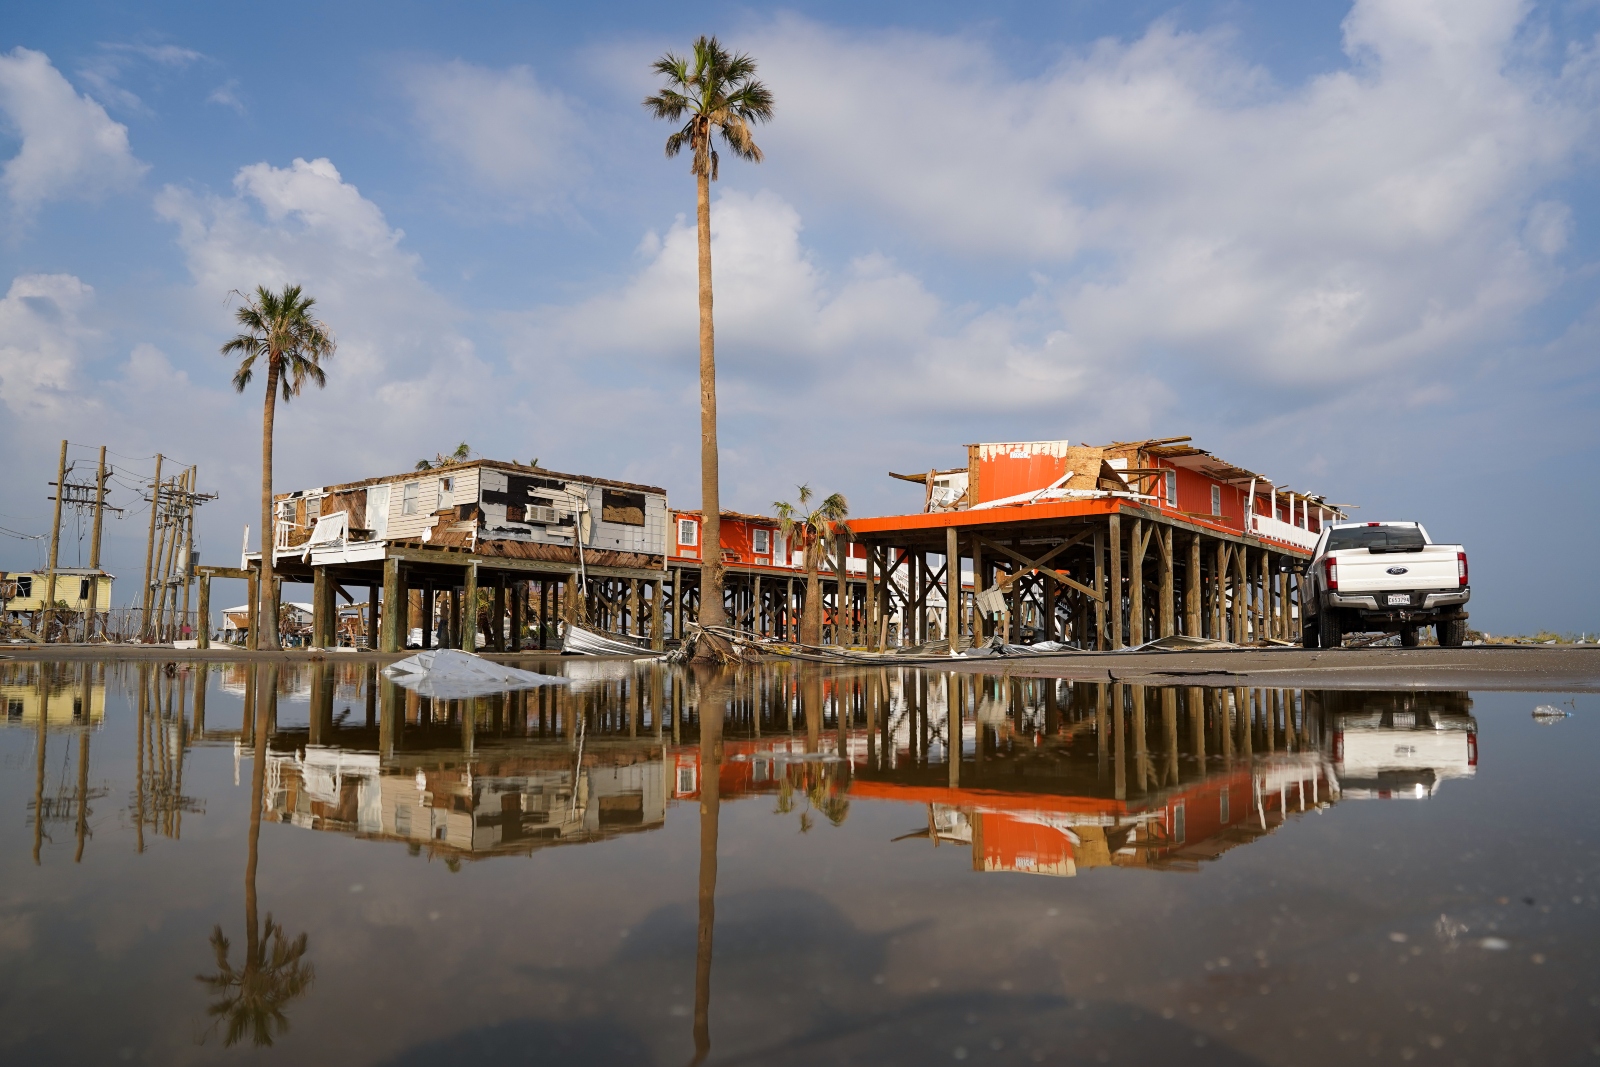 Storm-damaged houses are reflected in flood water after Hurricane Ida made landfall on Grand Isle, Louisiana. The storm destroyed thousands of homes and eroded sections of the coastline.